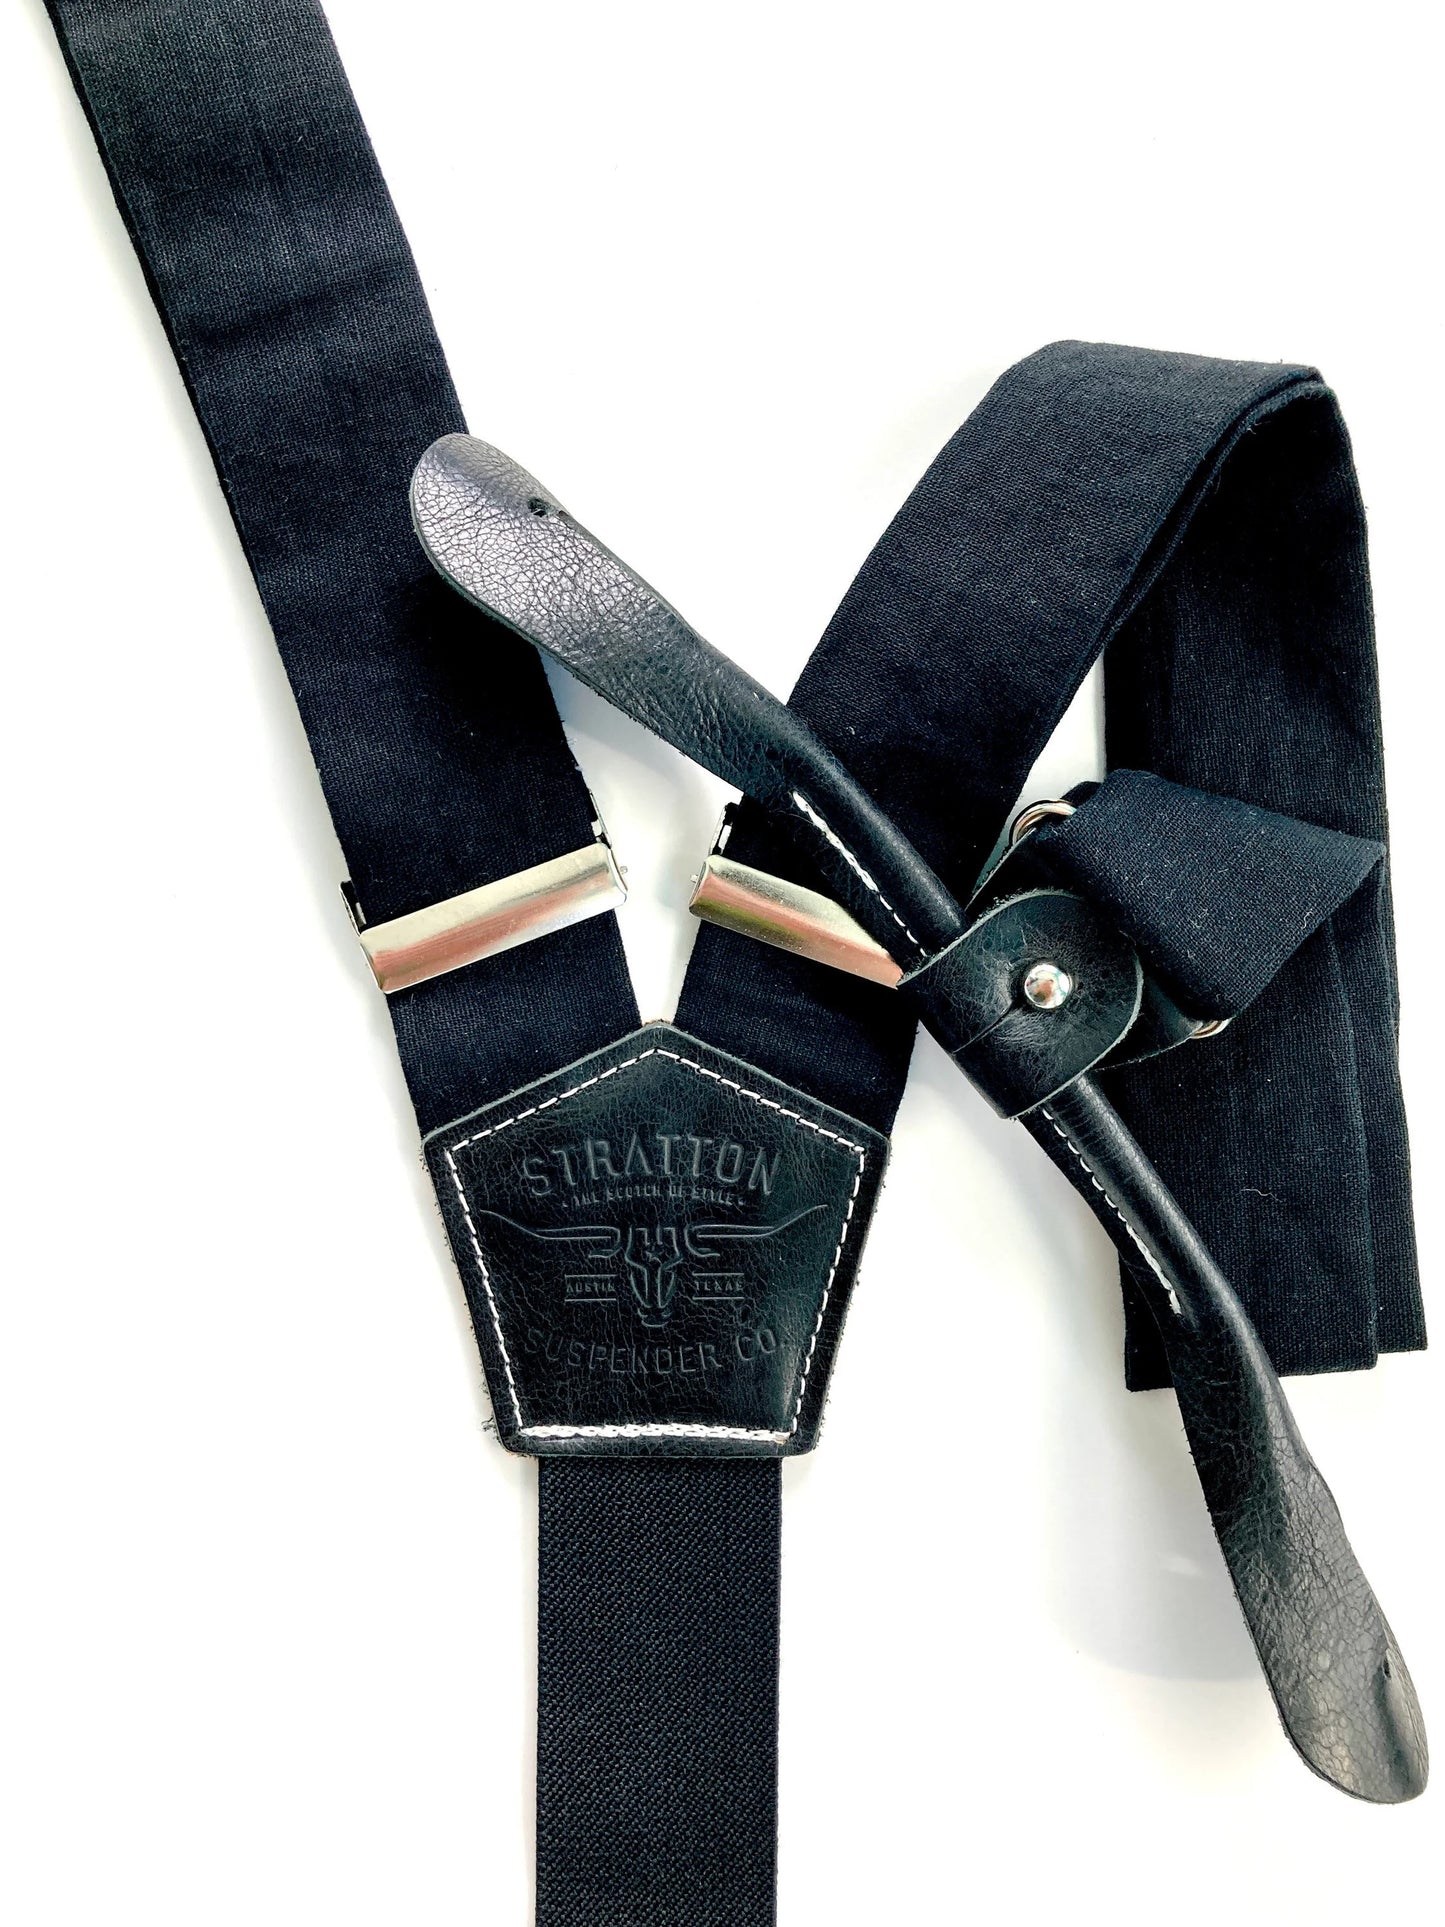 Black and White - Black Tie Suspenders / Braces with Leather Button On Attachment